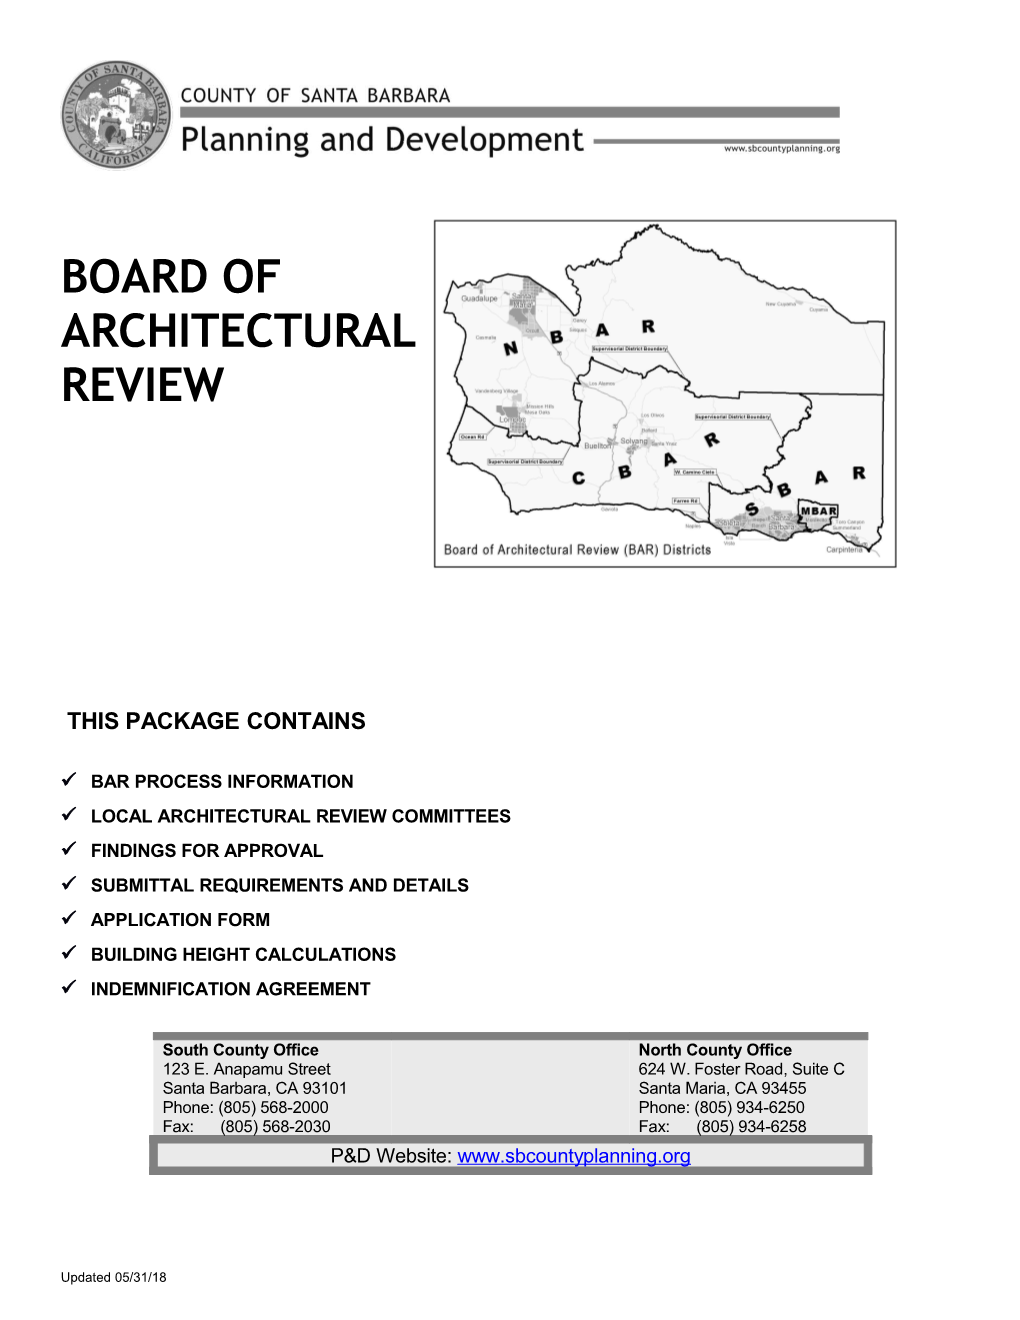 Board of Architectural Review - Structure